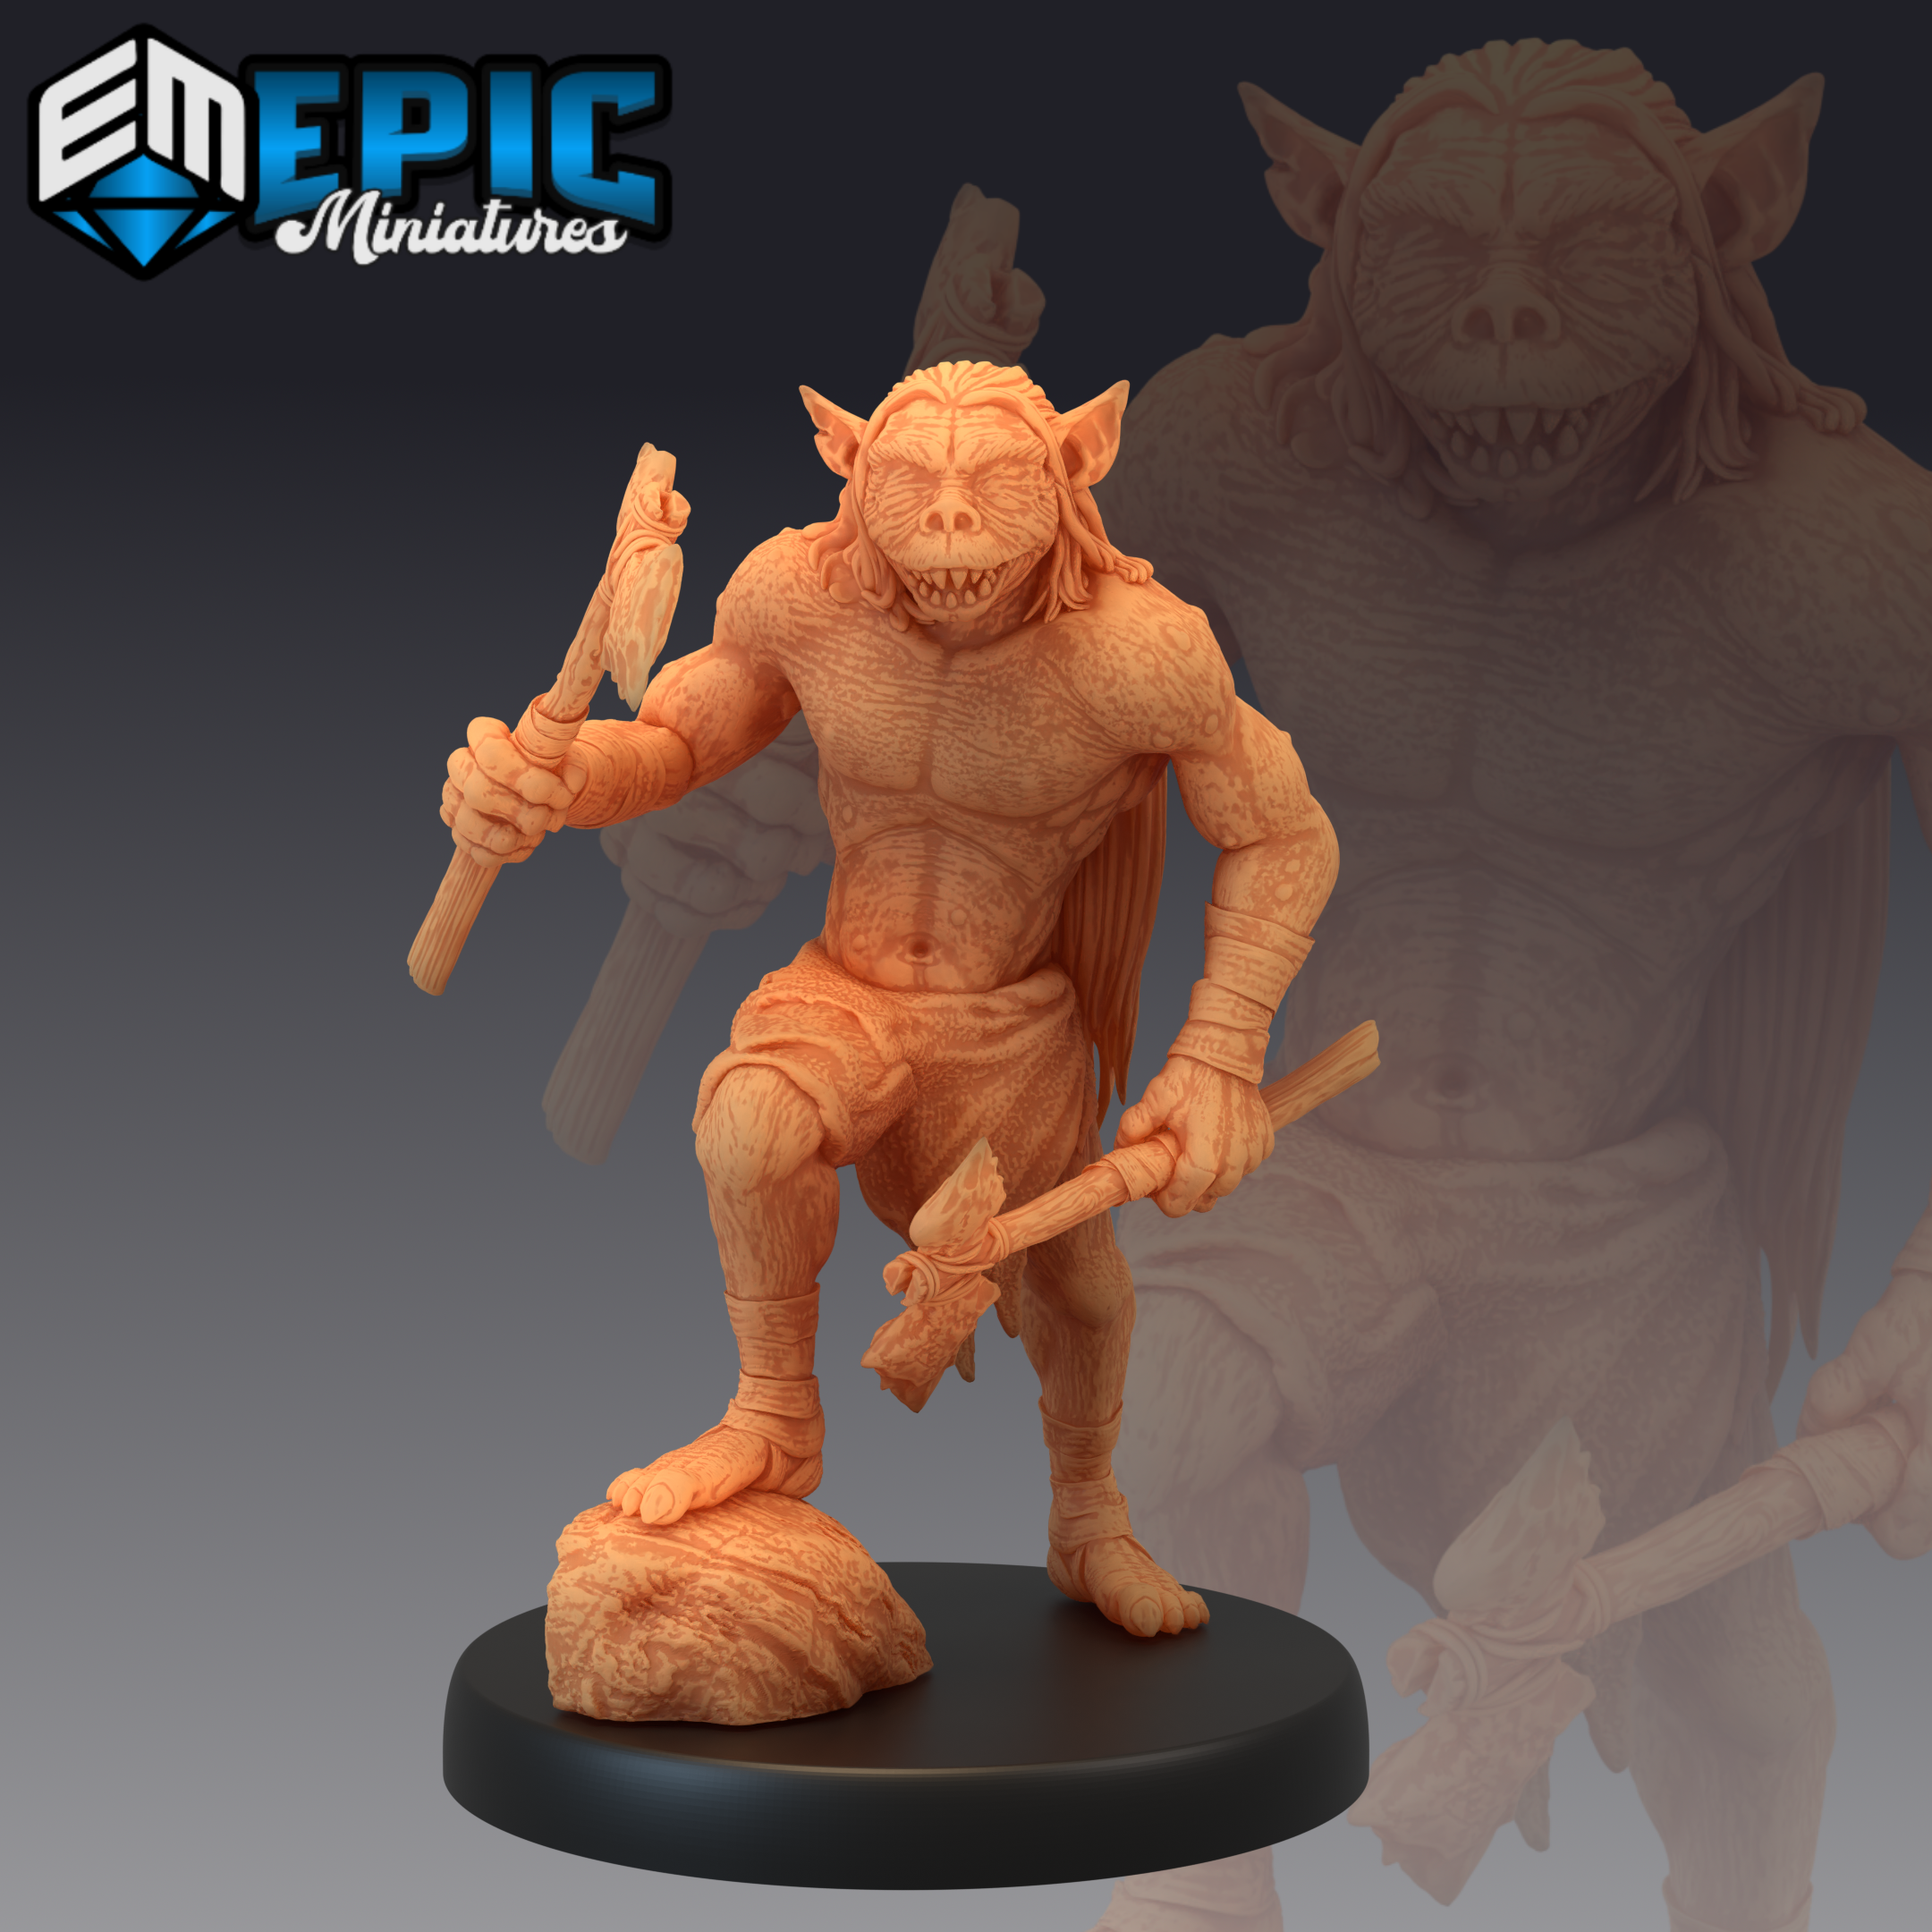 Humanoid monster by Epic Miniatures